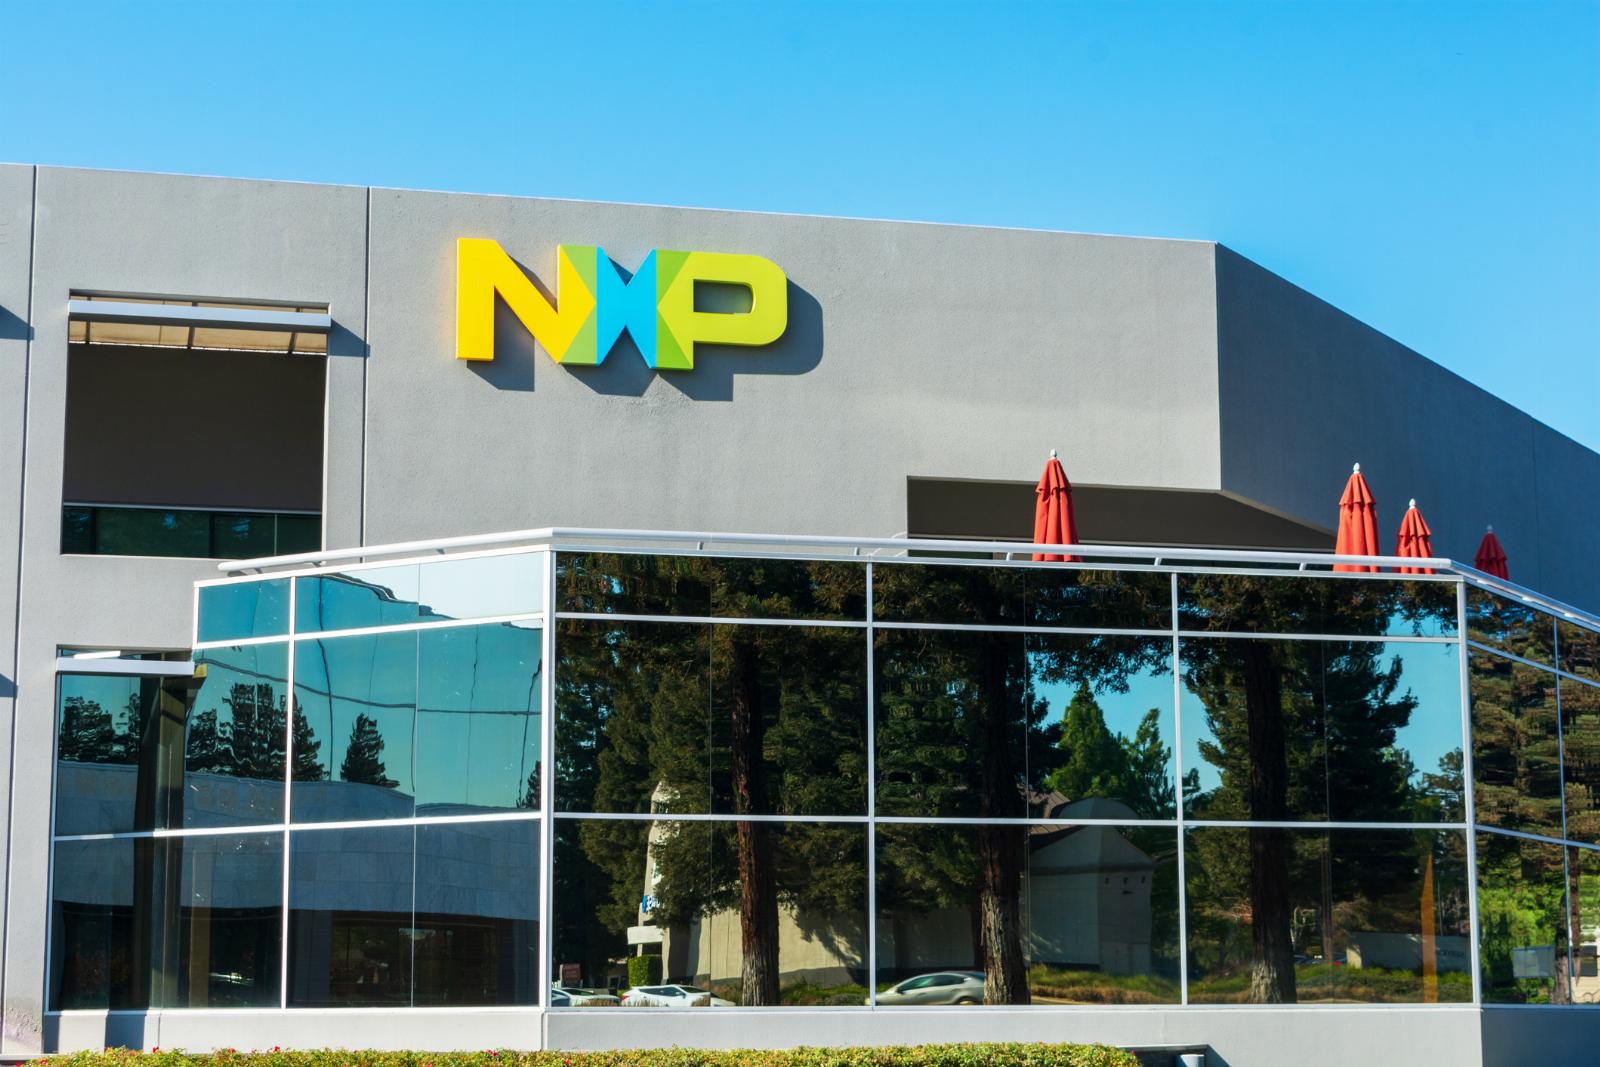 NXP unveils its latest processor, the i.MX 91, during Computex